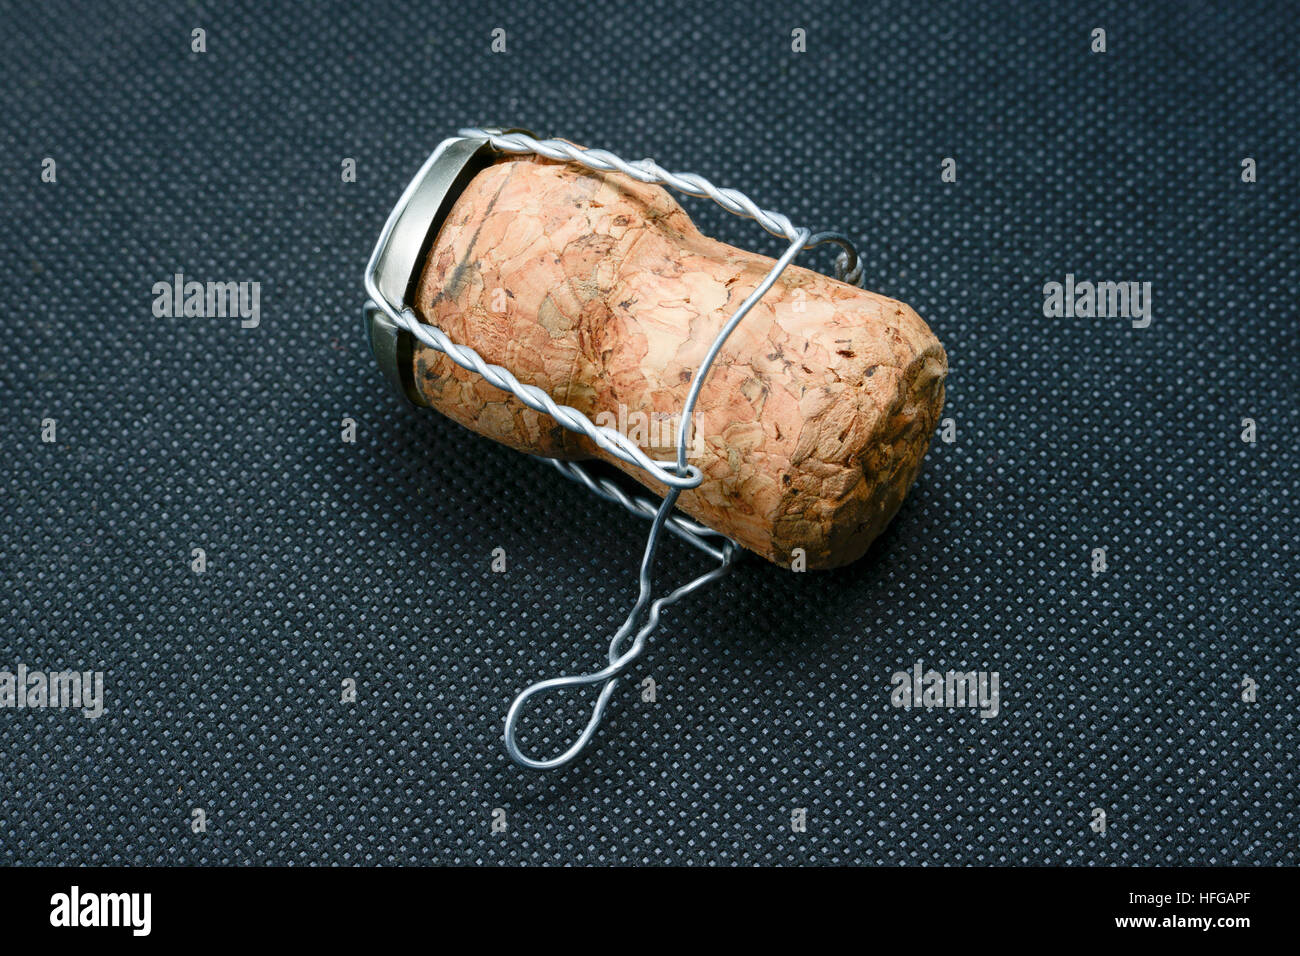 detailed champagne cork on black perforated material background Stock Photo